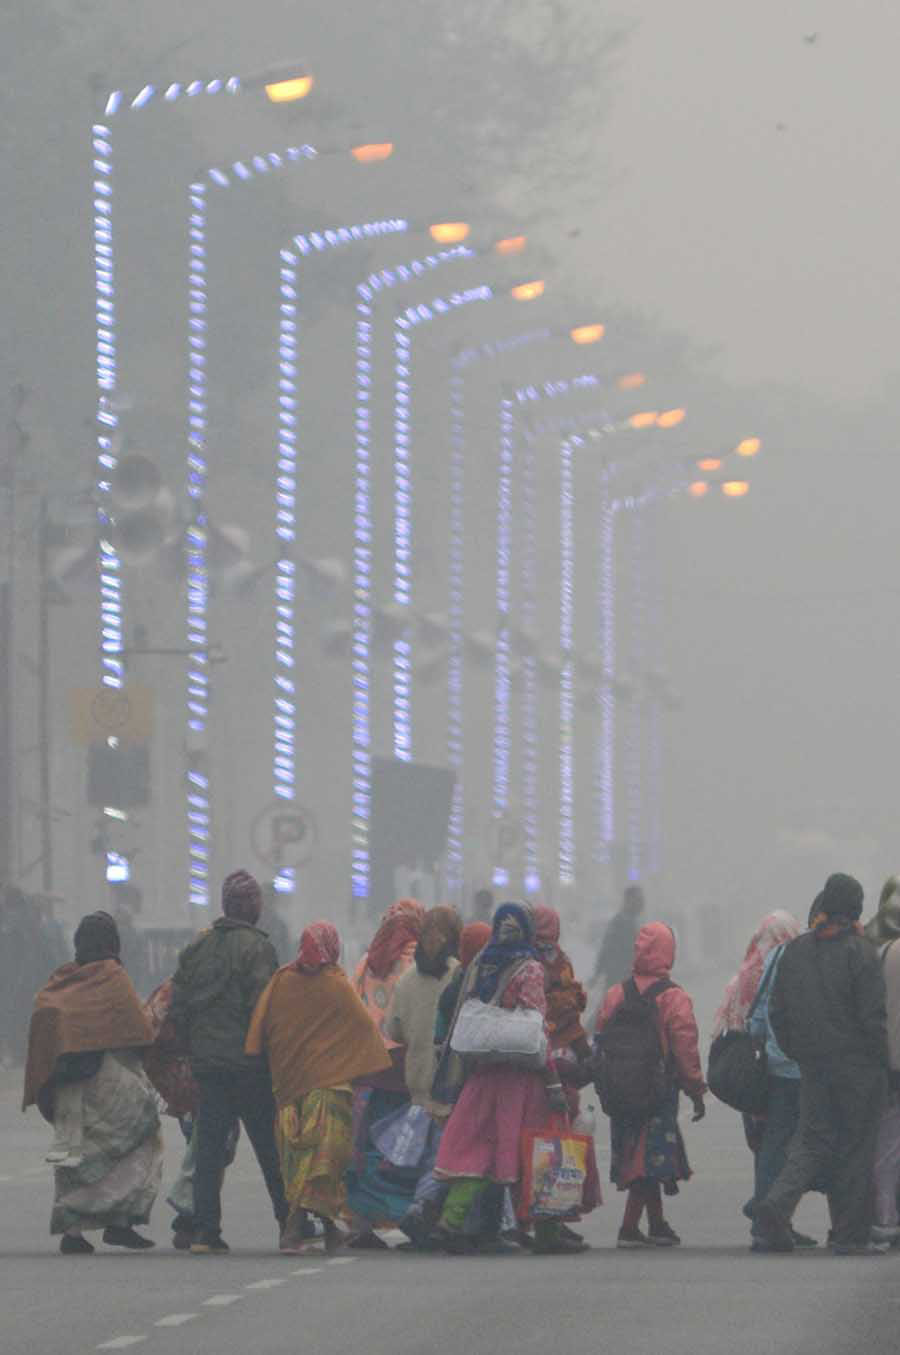 Fog and mist prevailed in the city with low temperatures. The lowest temperature recorded on Tuesday was 11.8˚C. India Meteorological Department has predicted rainfall activity over the districts of south Bengal due to wind discontinuity over Jharkhand and Chhattisgarh area and moisture incursion from Bay of Bengal during January 23 and 24. Kolkata may receive light rainfall on Wednesday   